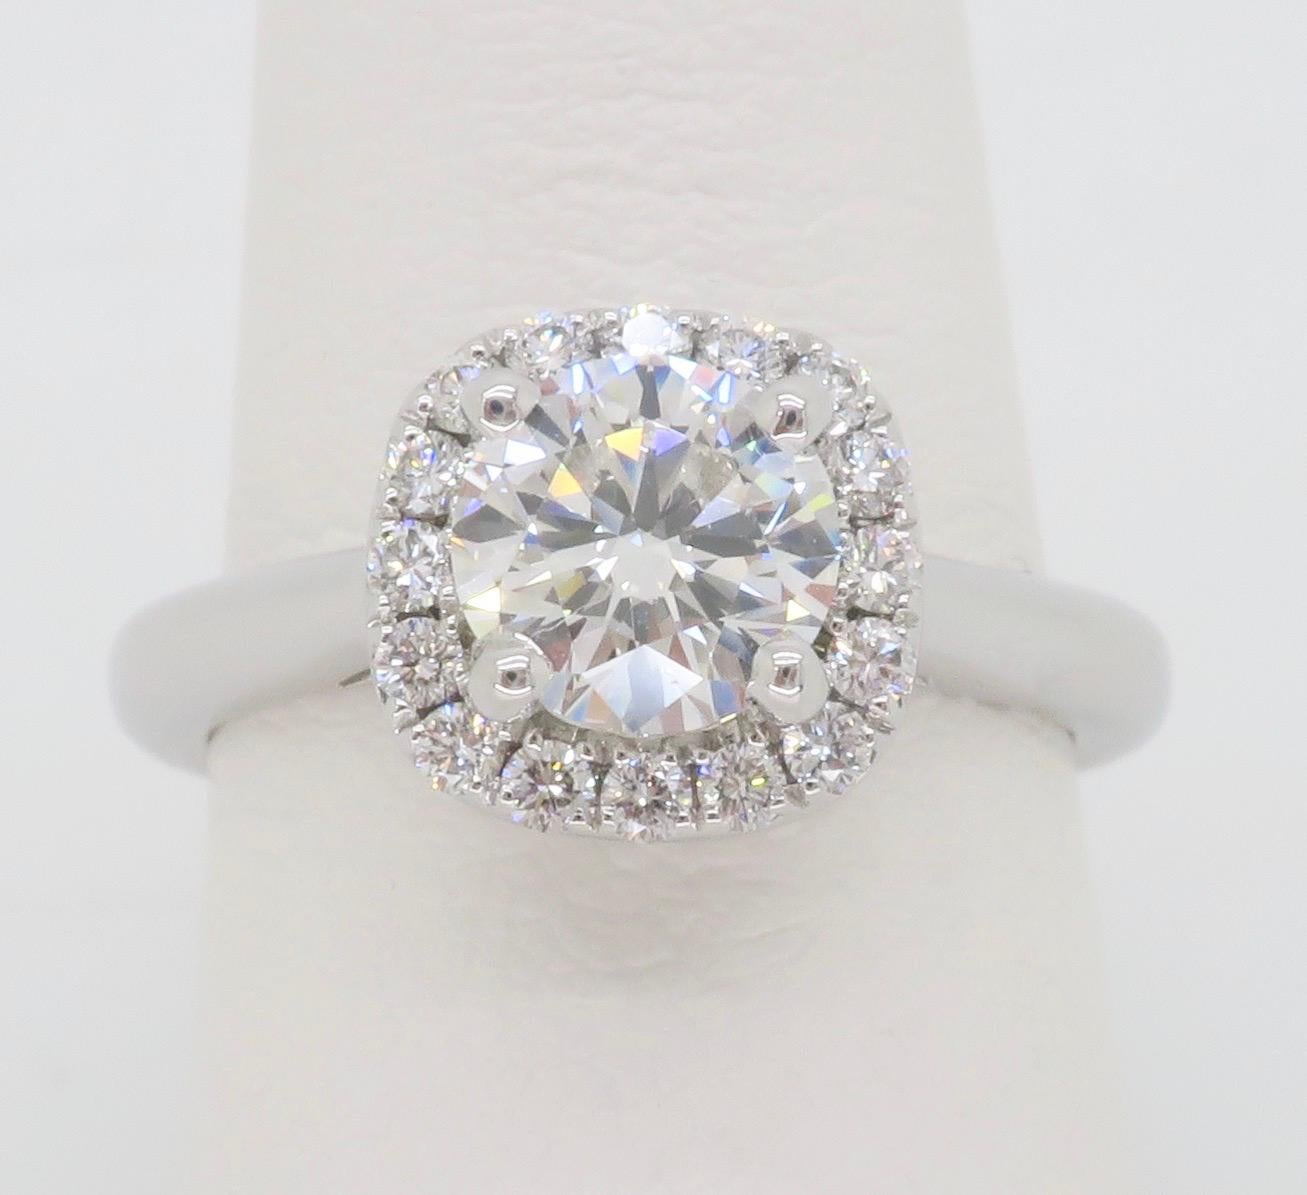 Round Cut GIA Certified Round Brilliant Cut Diamond in a Stunning Scott Kay Halo Setting  For Sale